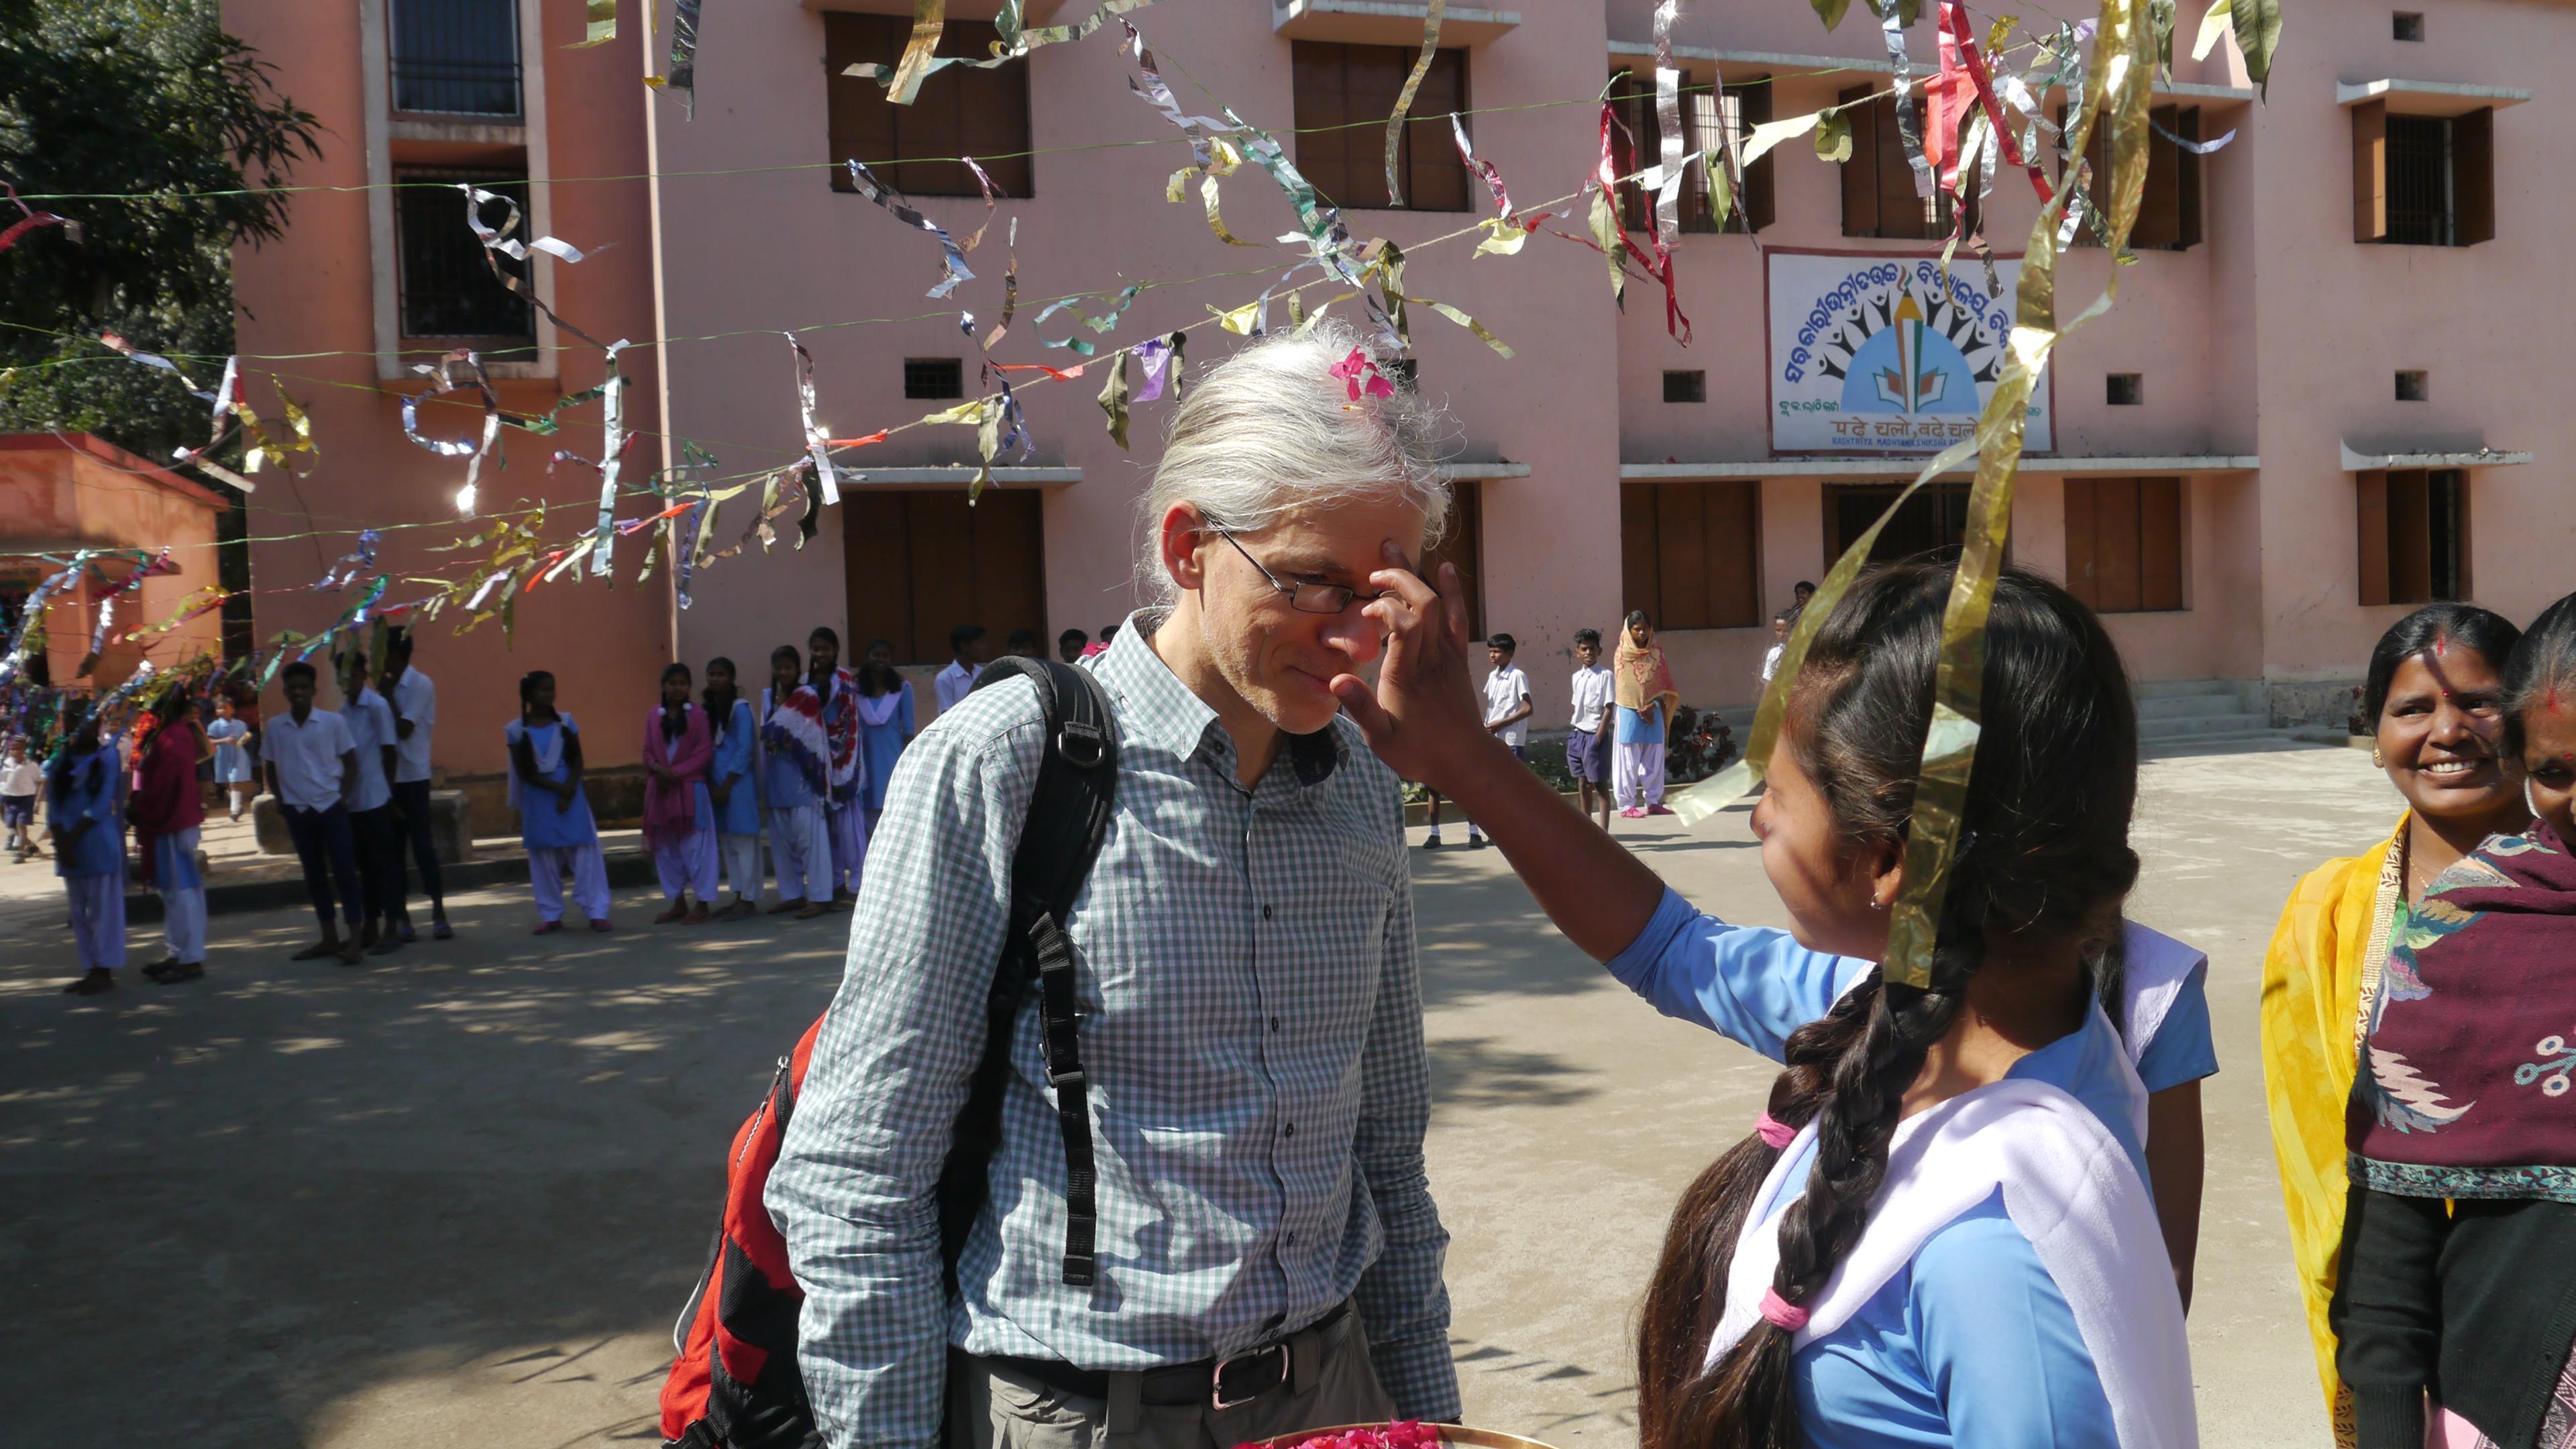 Martin Aufmuth gets his forehead painted by Indian woman